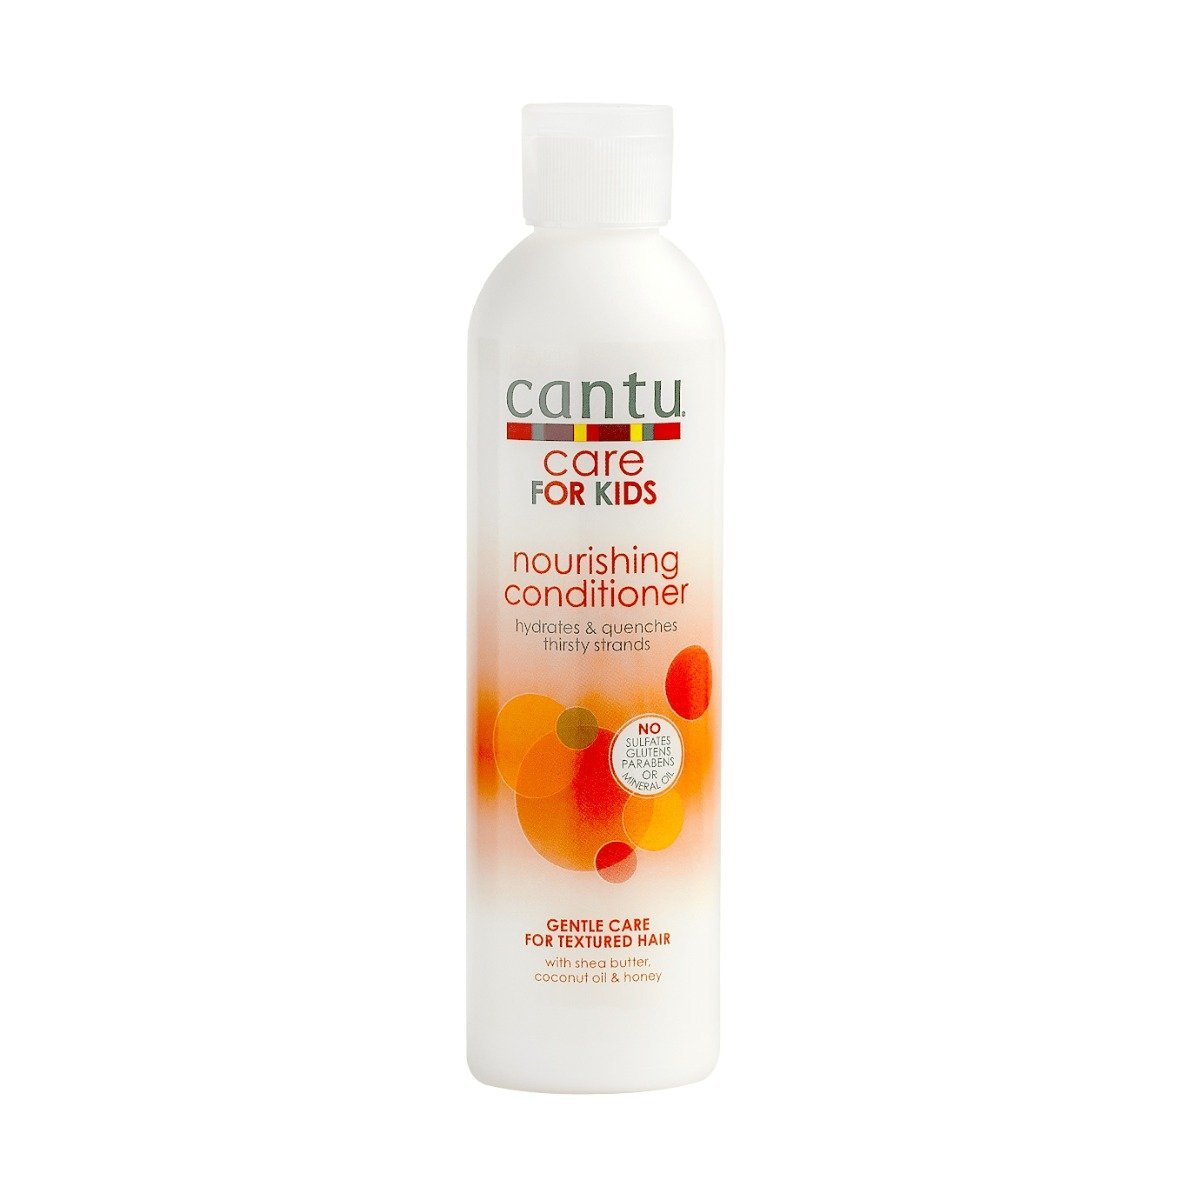 Cantu Care For Kids Nourishing Conditioner - 237ml - Bloom Pharmacy